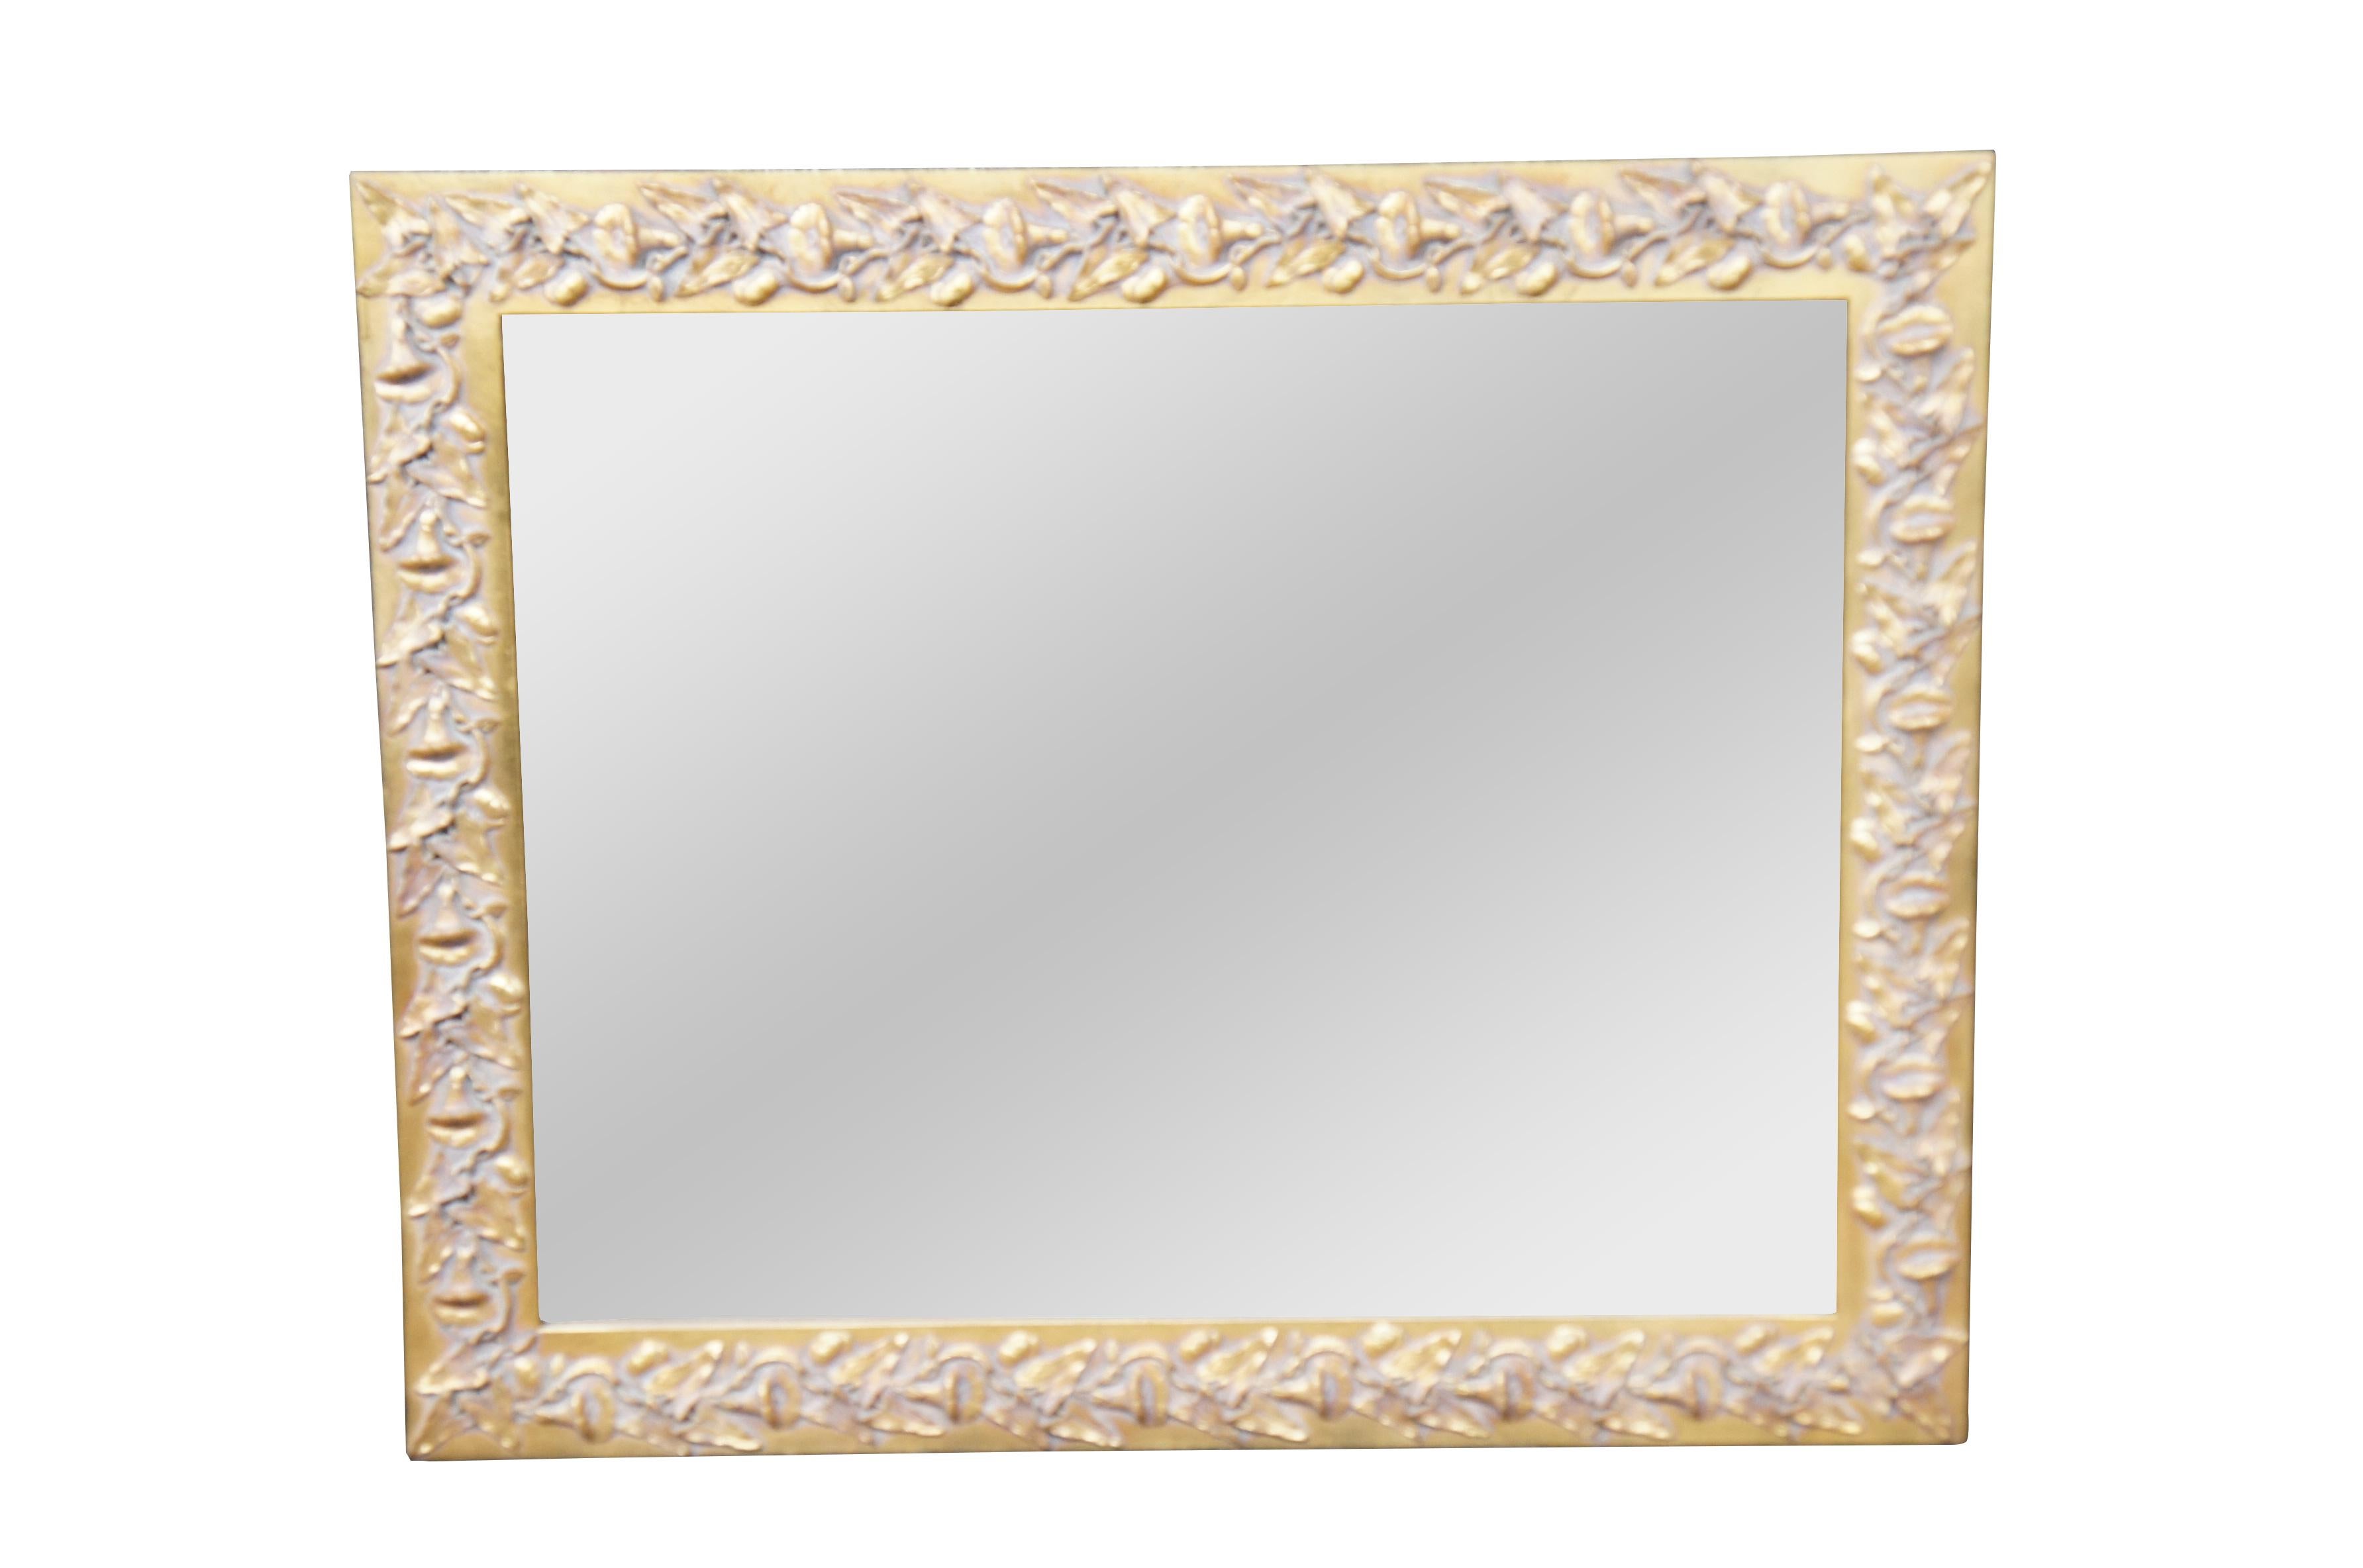 Vintage Neoclassical Low Relief Gold Toned Rectangular Mirror Beveled Glass 33